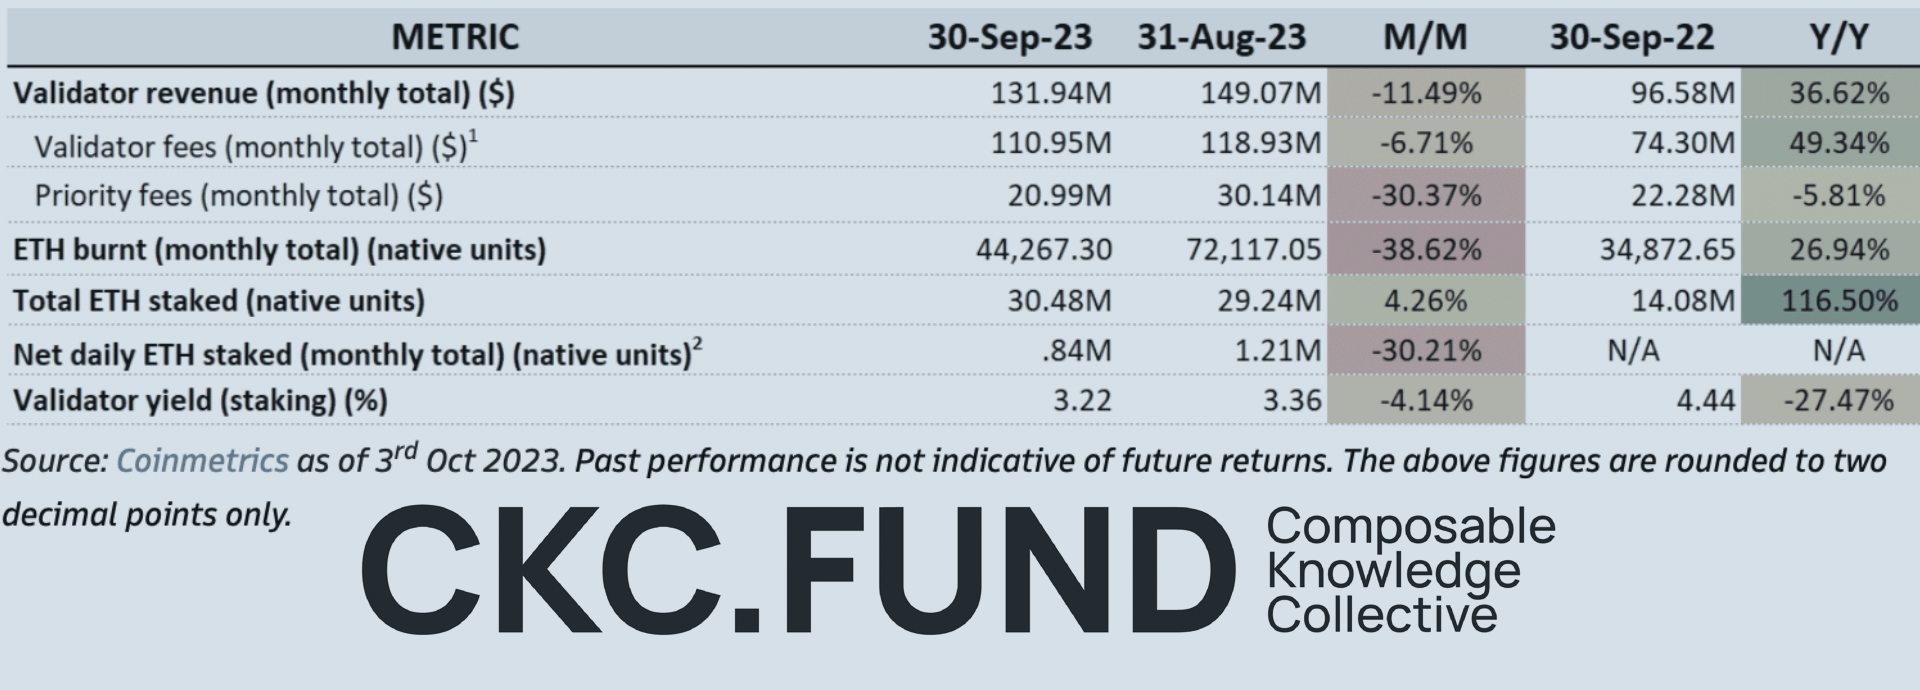 Comparative table by CKC Fund displaying various Ethereum metrics for September 2023 versus August 2023 and year-over-year, highlighting changes in validator revenue, fees, ETH burnt, and staking yields, reflecting post-Merge adaptation challenges.